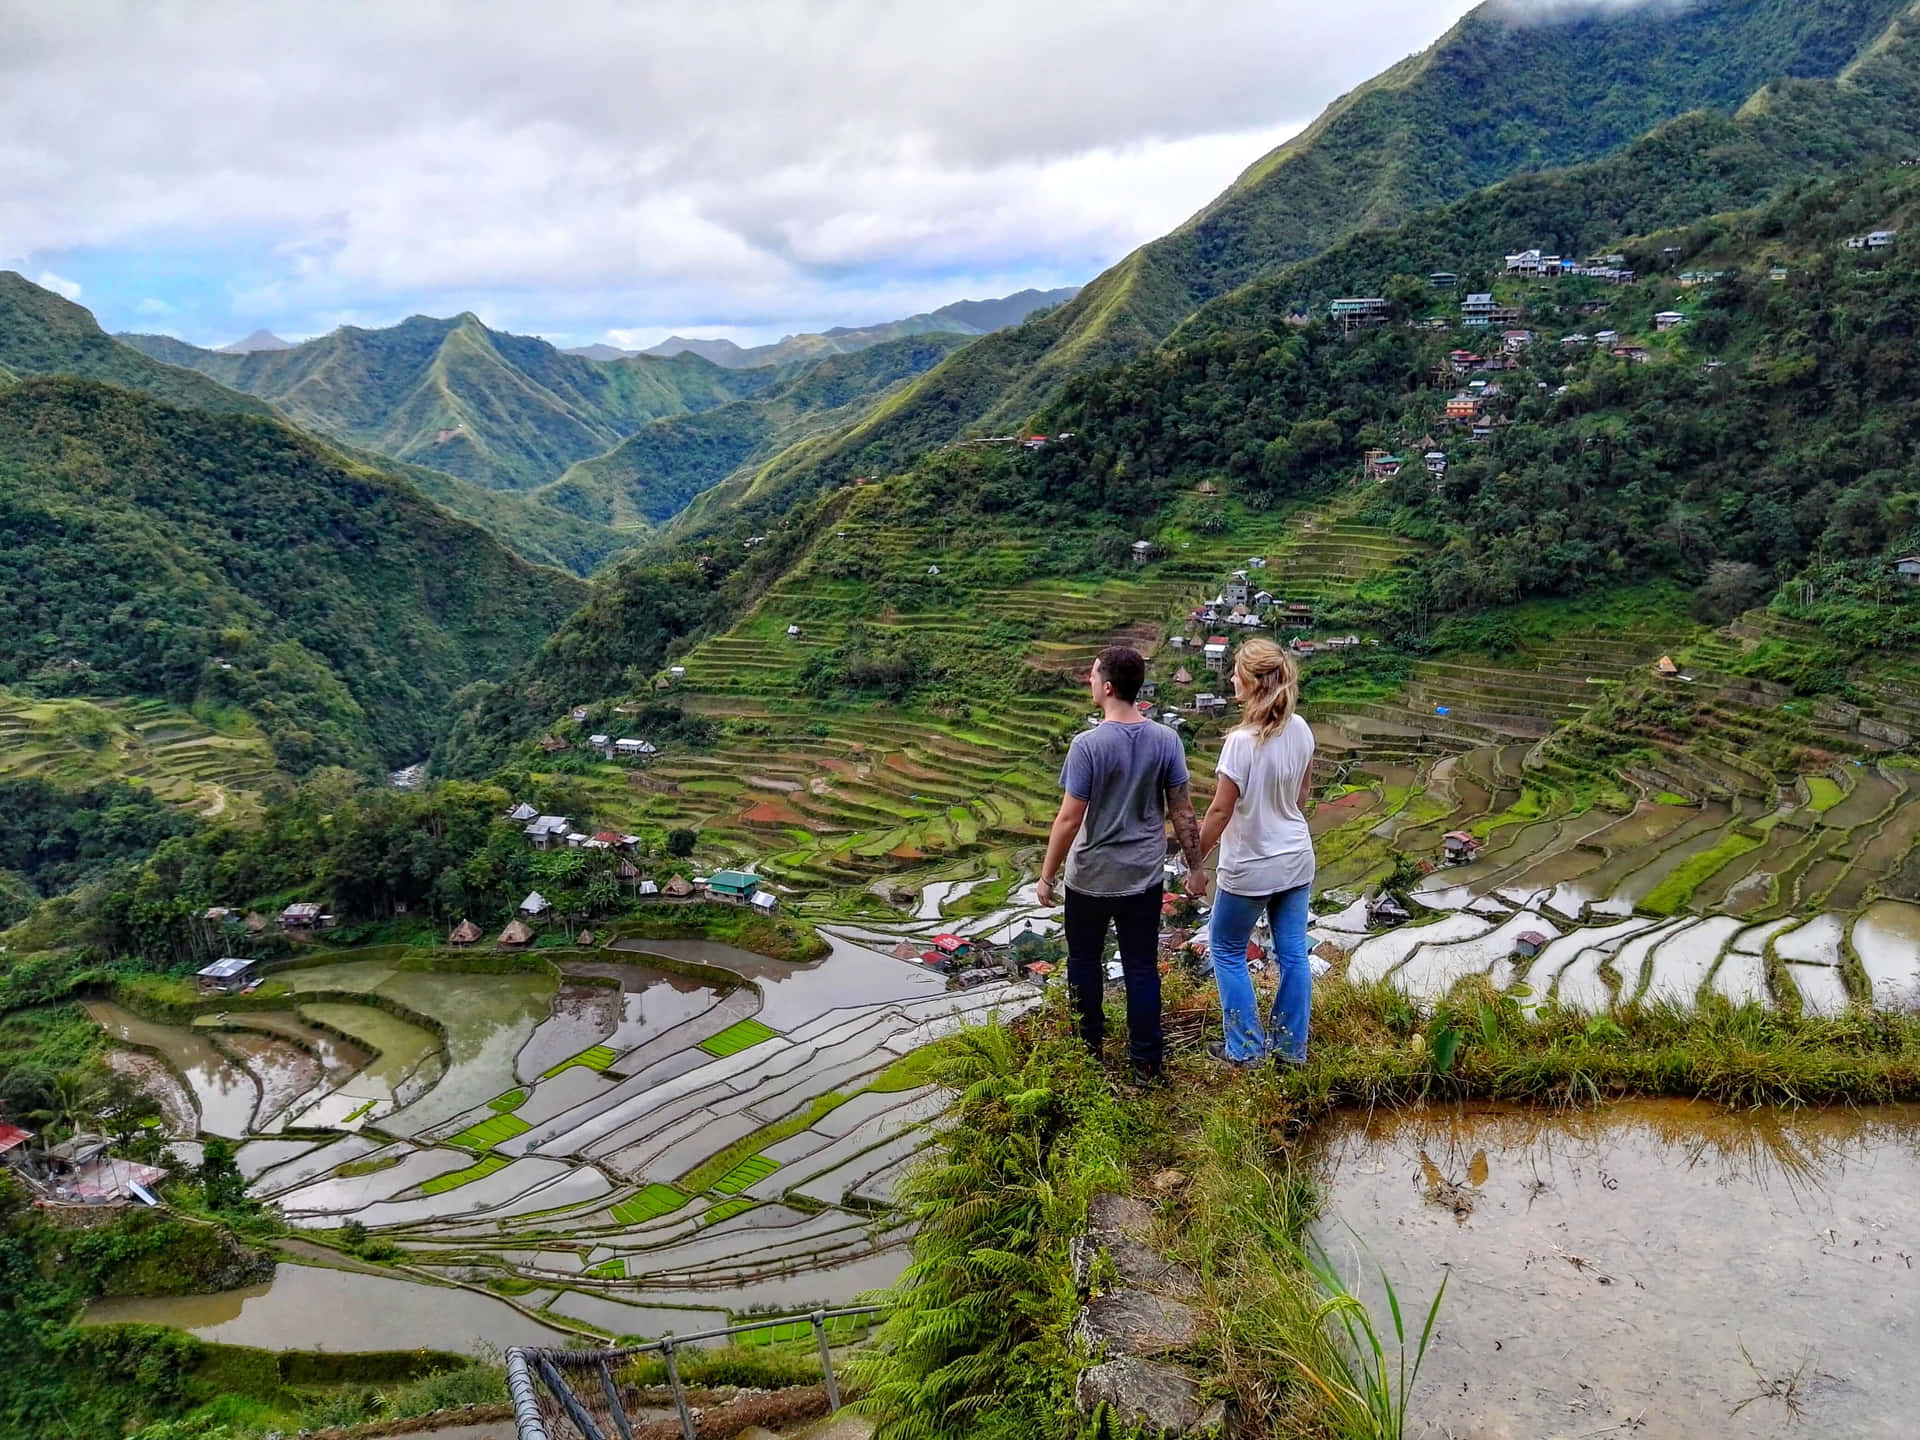 Couple In Banaue Rice Terraces In The Philippines Wallpaper